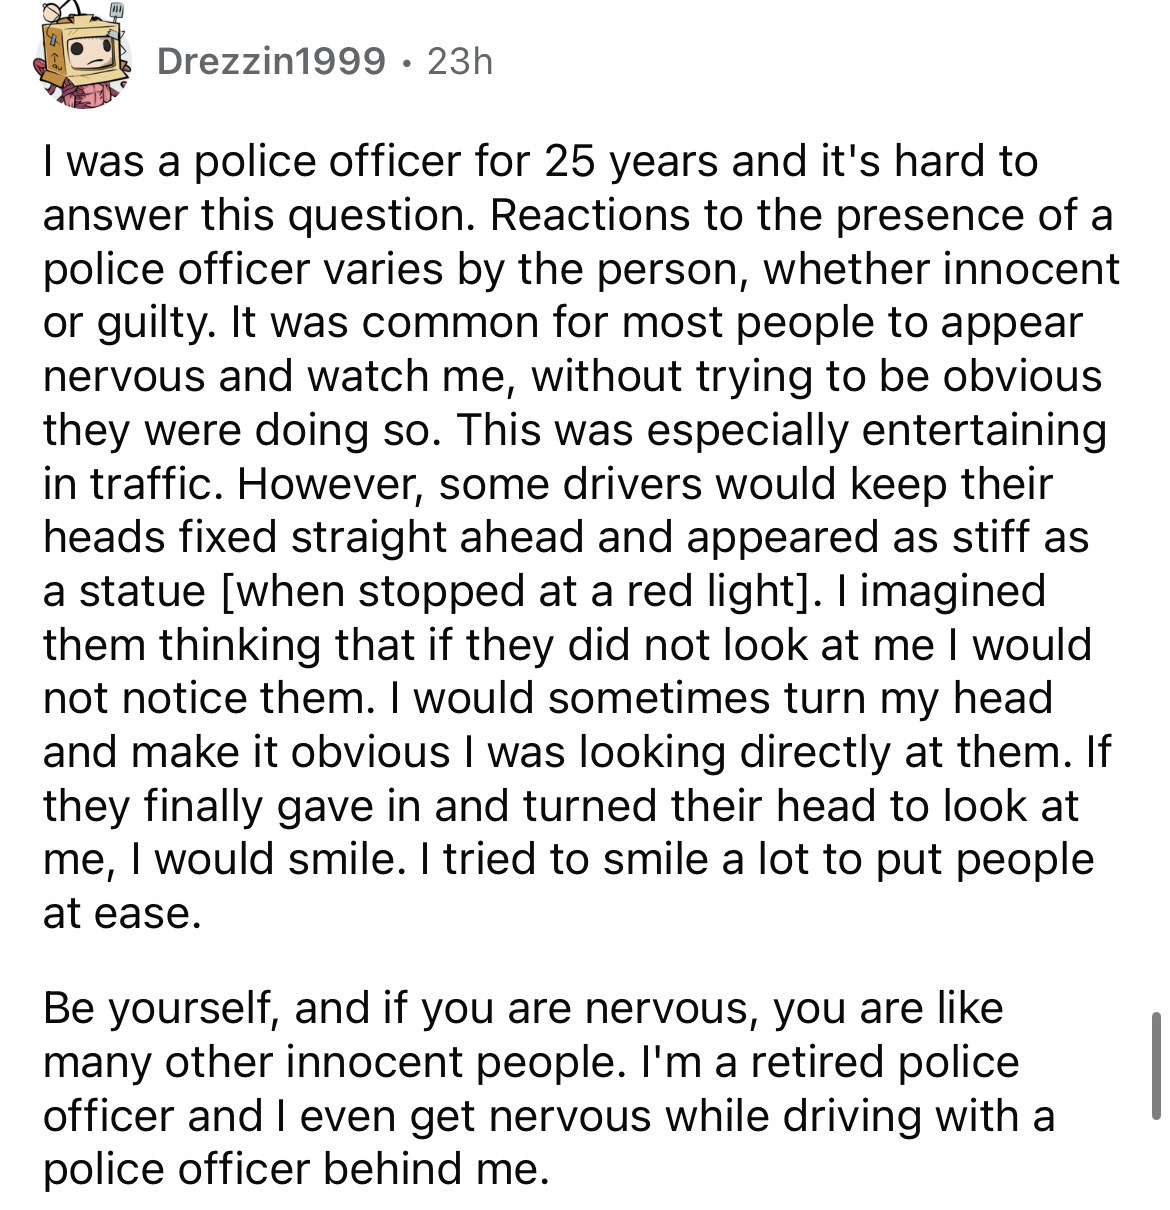 document - Drezzin1999 23h I was a police officer for 25 years and it's hard to answer this question. Reactions to the presence of a police officer varies by the person, whether innocent or guilty. It was common for most people to appear nervous and watch